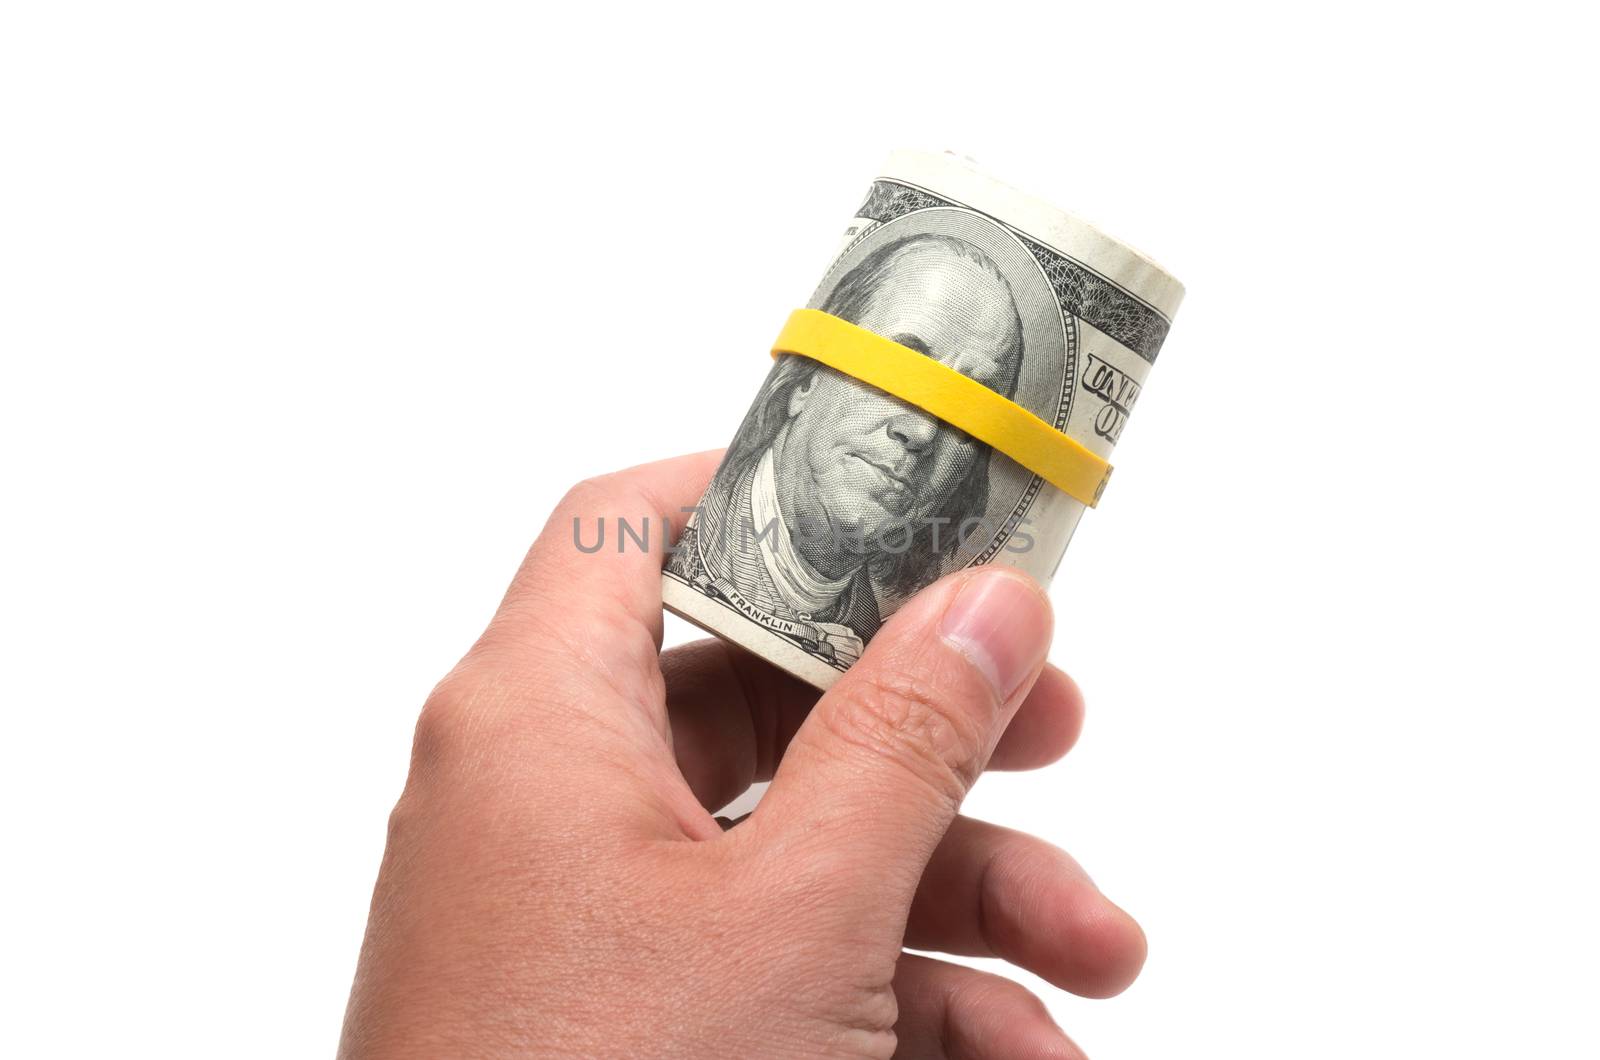 Roll of us banknotes with 100 dollars at the surface by daoleduc